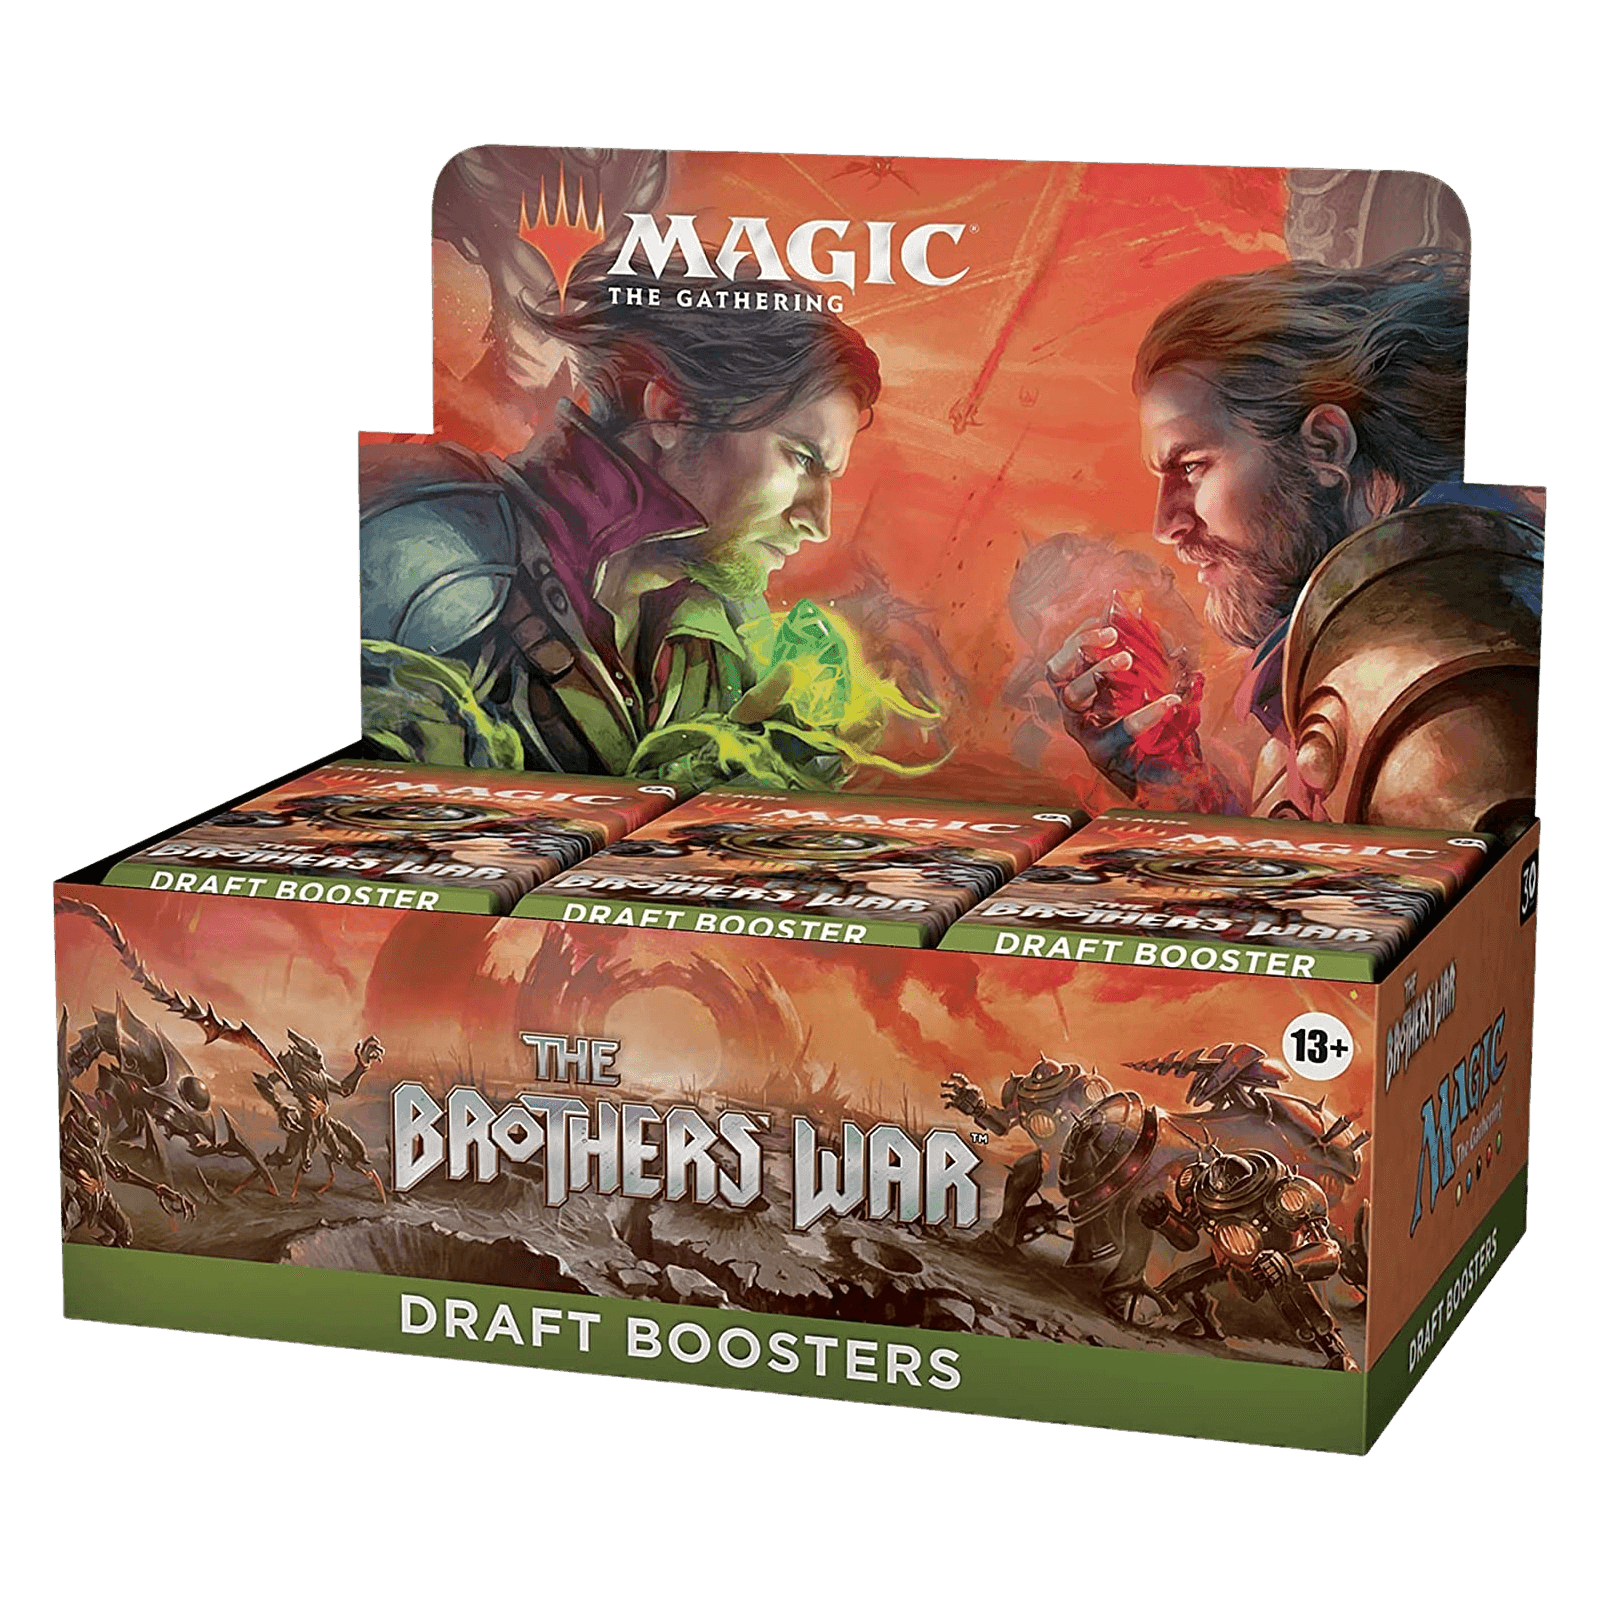 Magic: The Gathering - The Brothers War Draft Booster Box (36 Packs) - The Card Vault